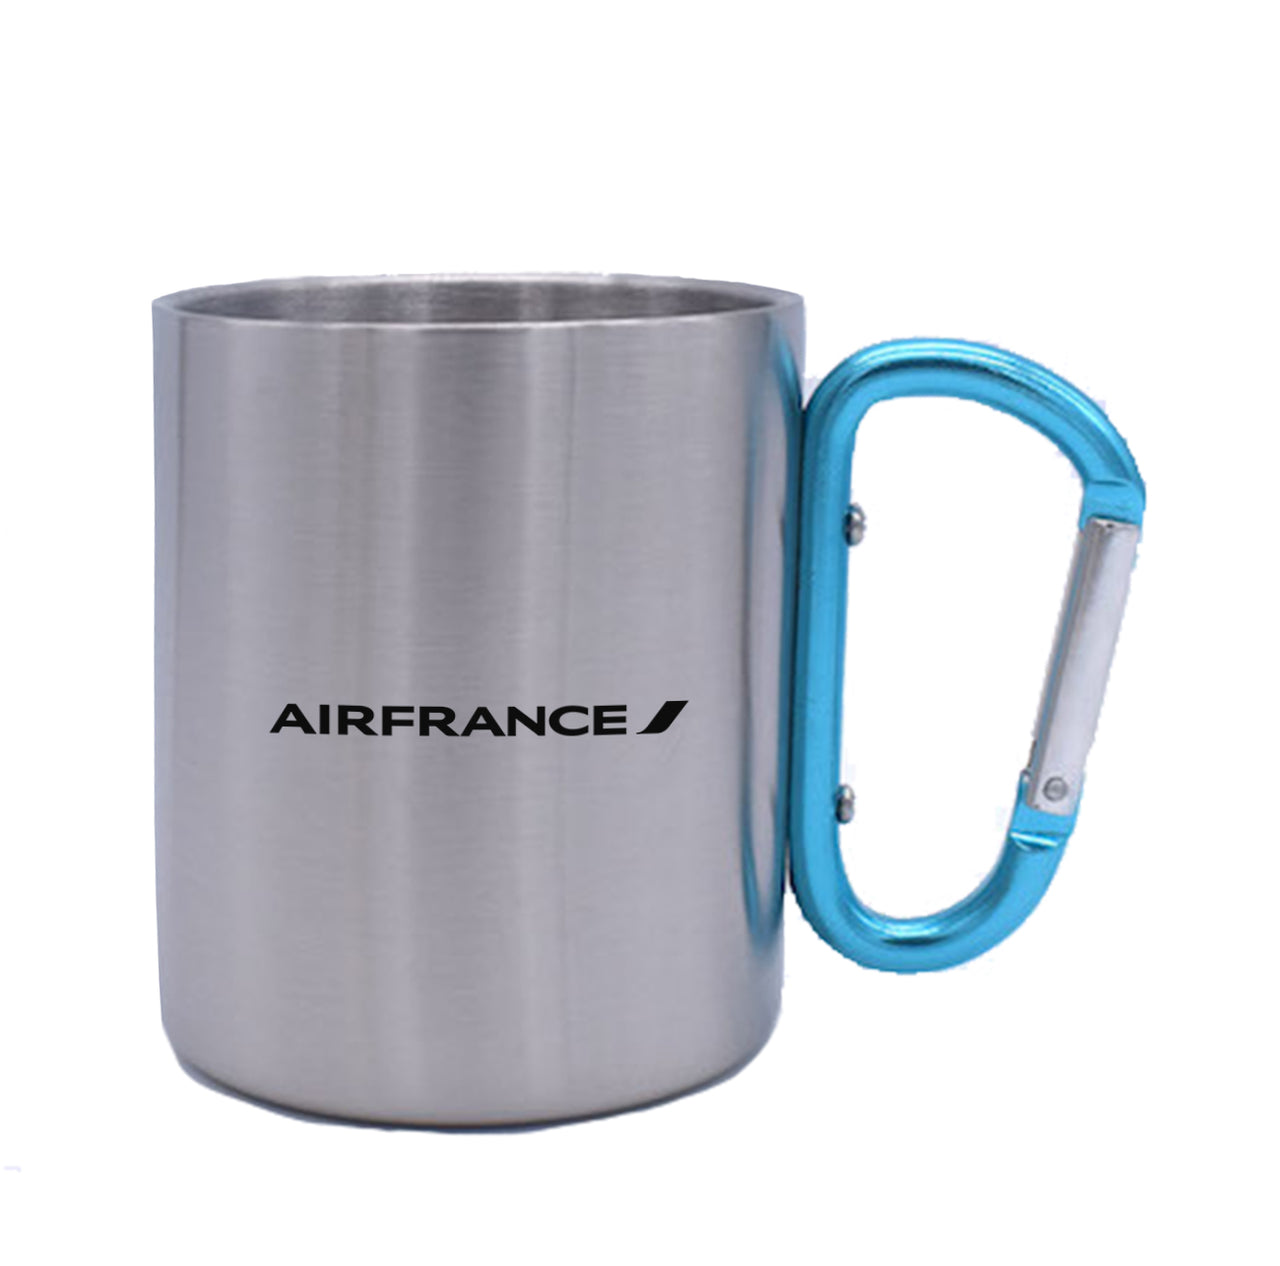 Air France Airlines Designed Stainless Steel Outdoors Mugs